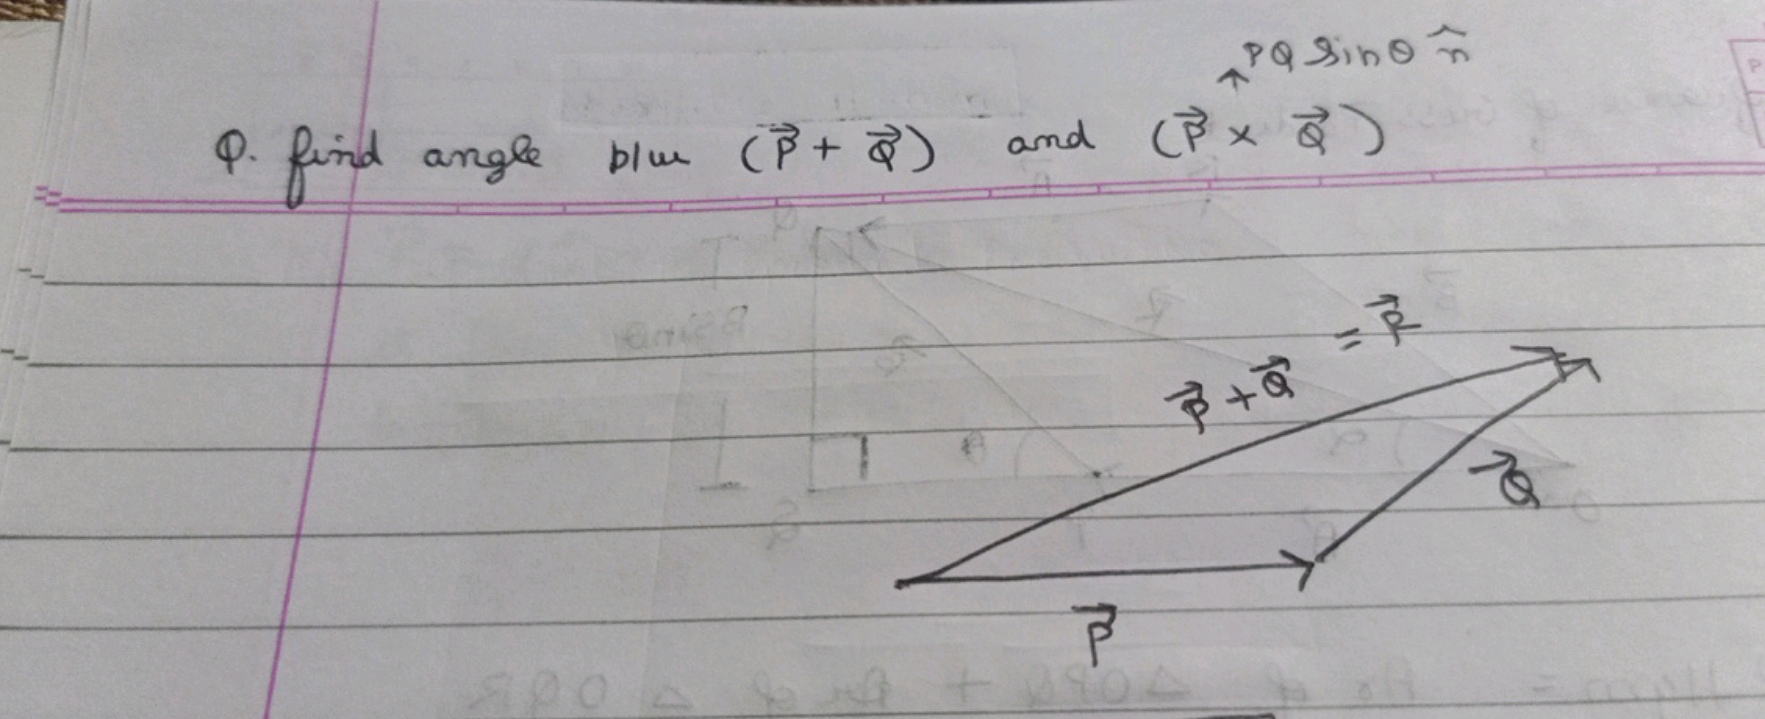 Q. find angle blue (P+Q​) and (P×Q​)
